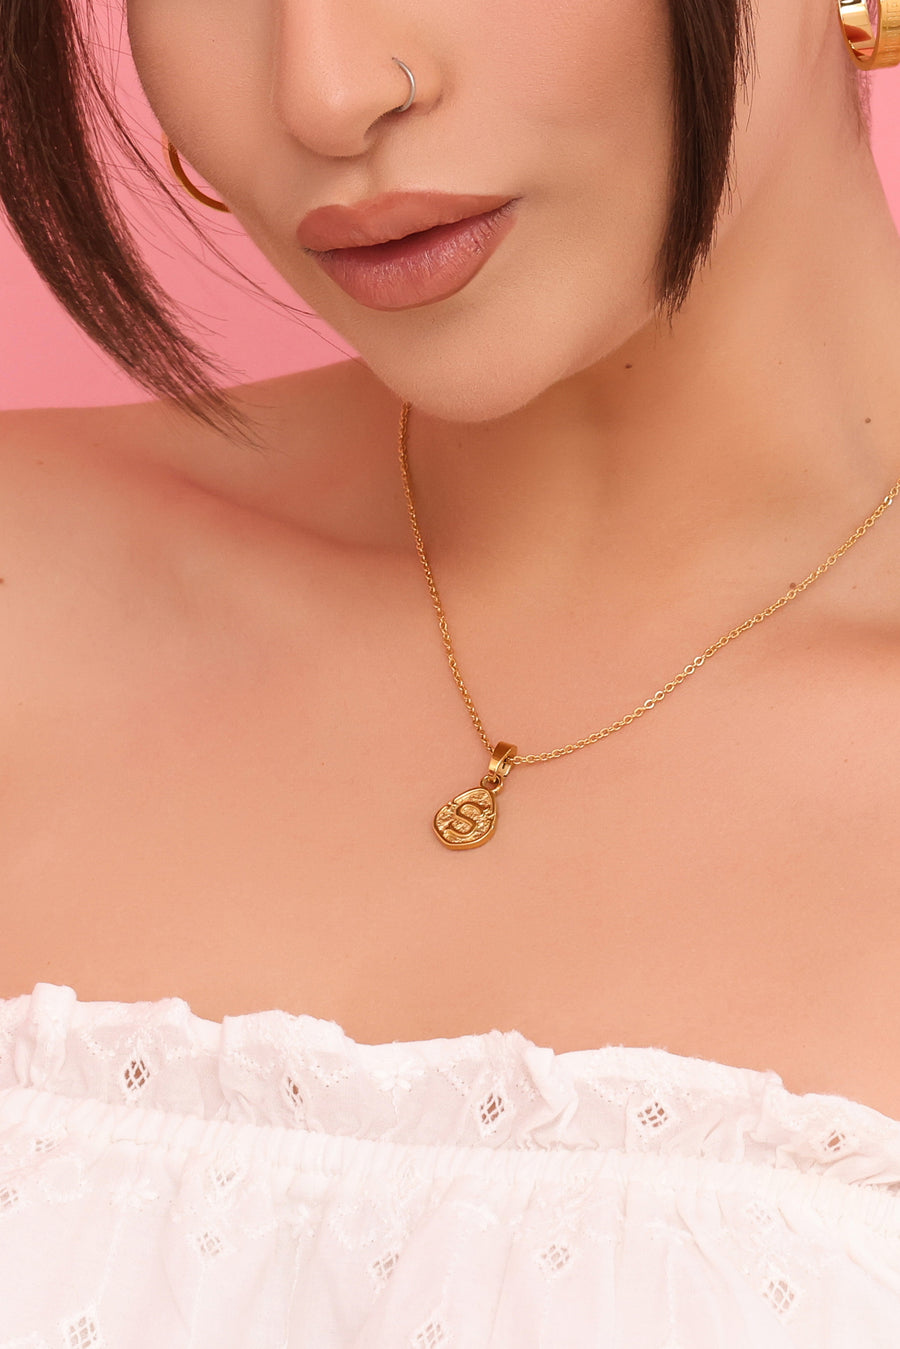 "G" Tberfil Letter Pendant with Petite Adjustable Chain Necklace